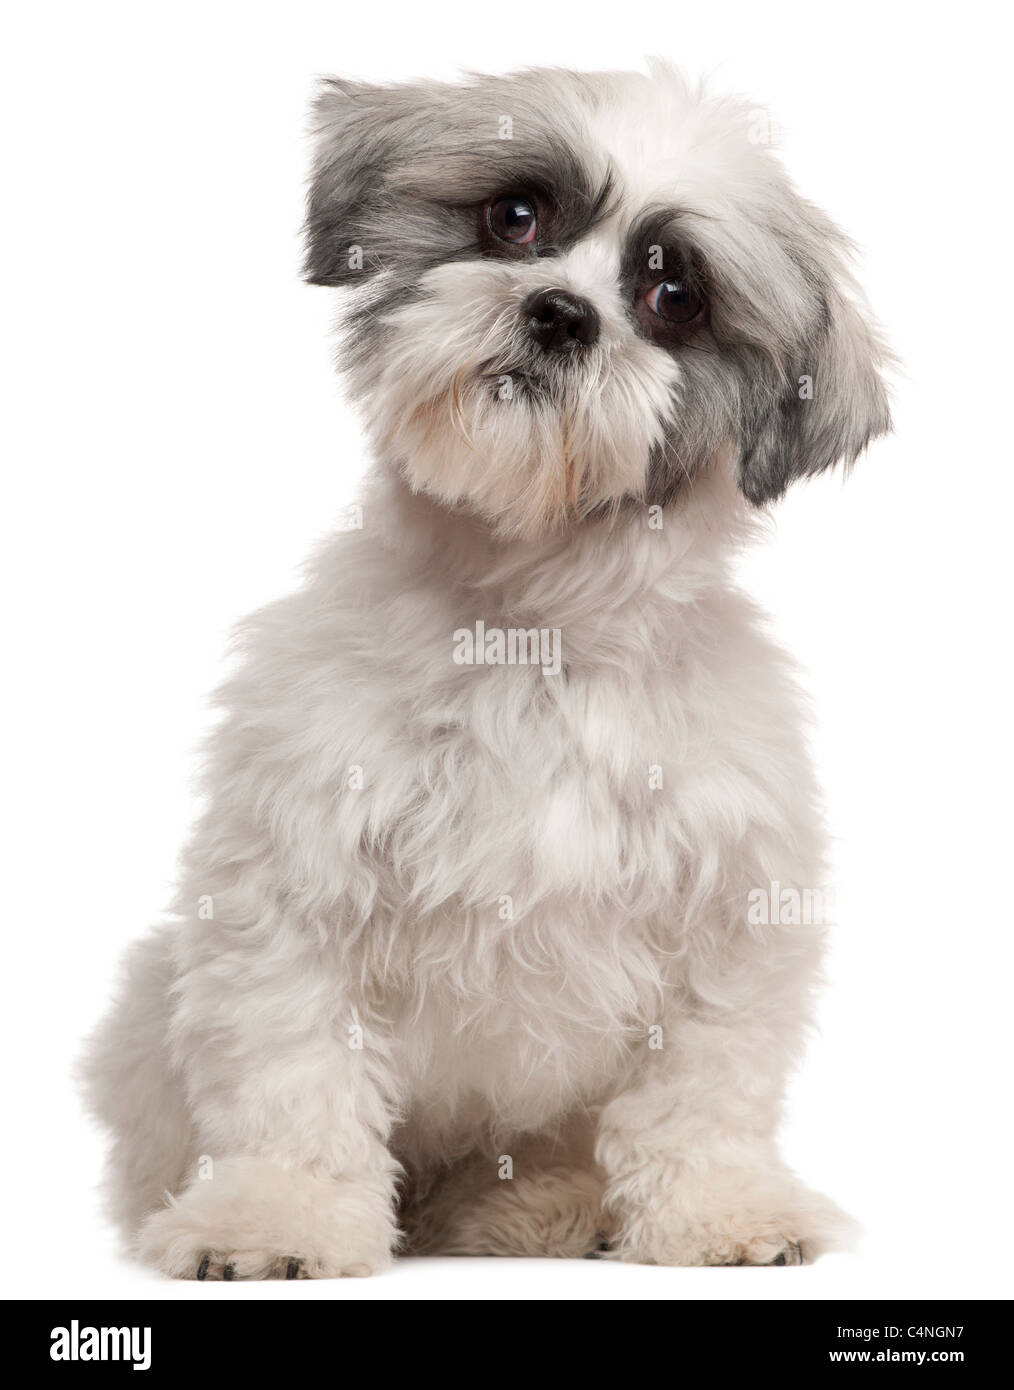 Mixed-breed dog, 1 year old, sitting in front of white background Stock Photo